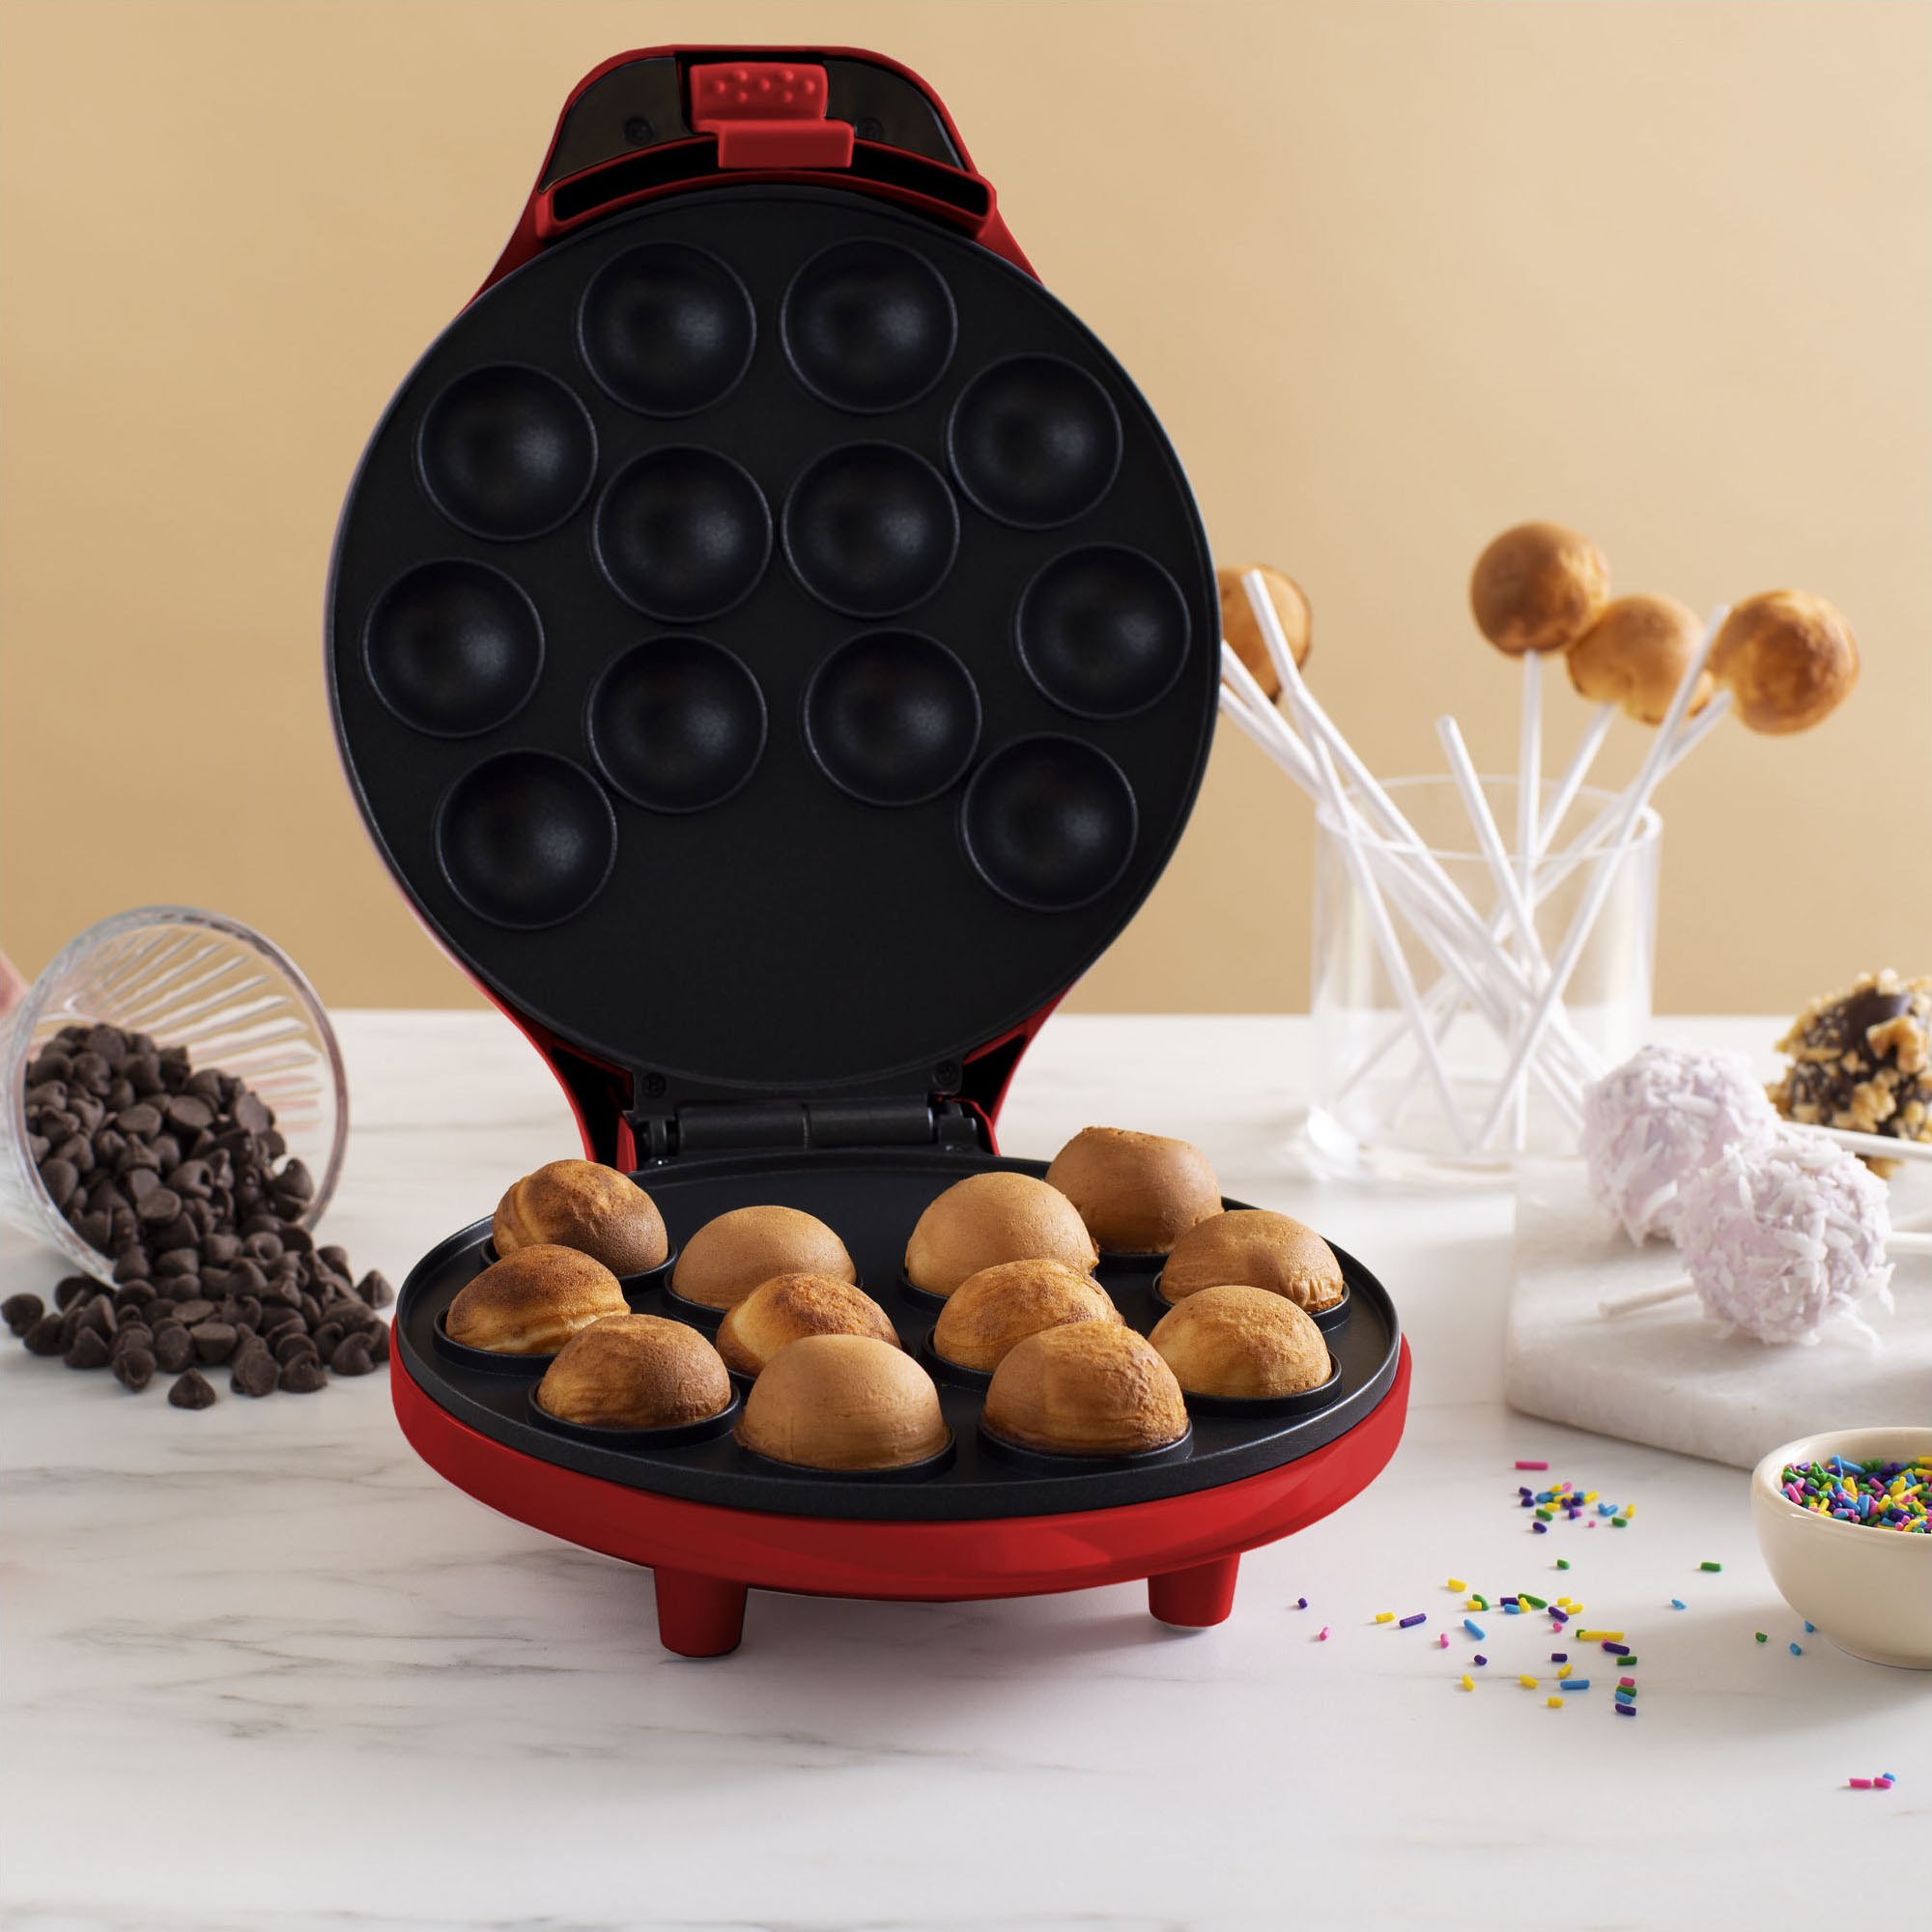 You Can Buy A Cake Pop Maker From